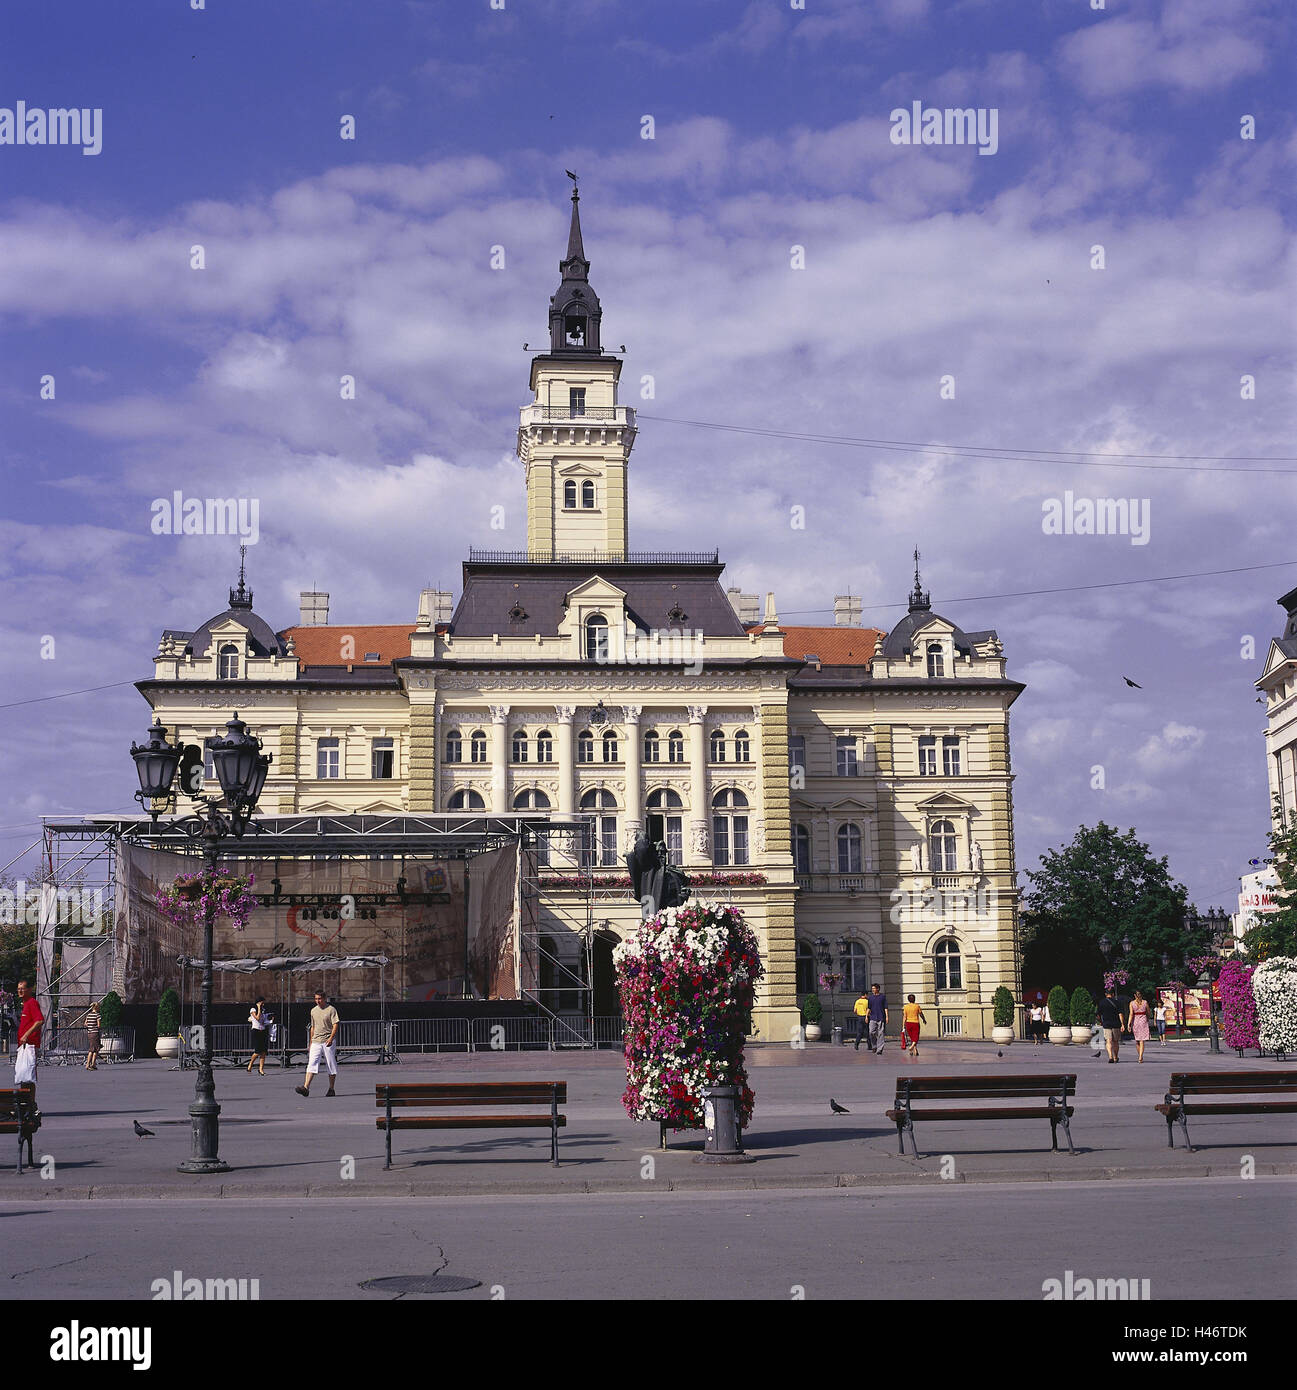 Serbia, Vojvodina, Novi Sad, city centre, space Slobode, old city hall, Europe, Southeast, Europe, Balkan Peninsula, destination, tourism, town, building, structure, architecture, person, pedestrian, passer-by, tower, city hall tower, outside, Stock Photo